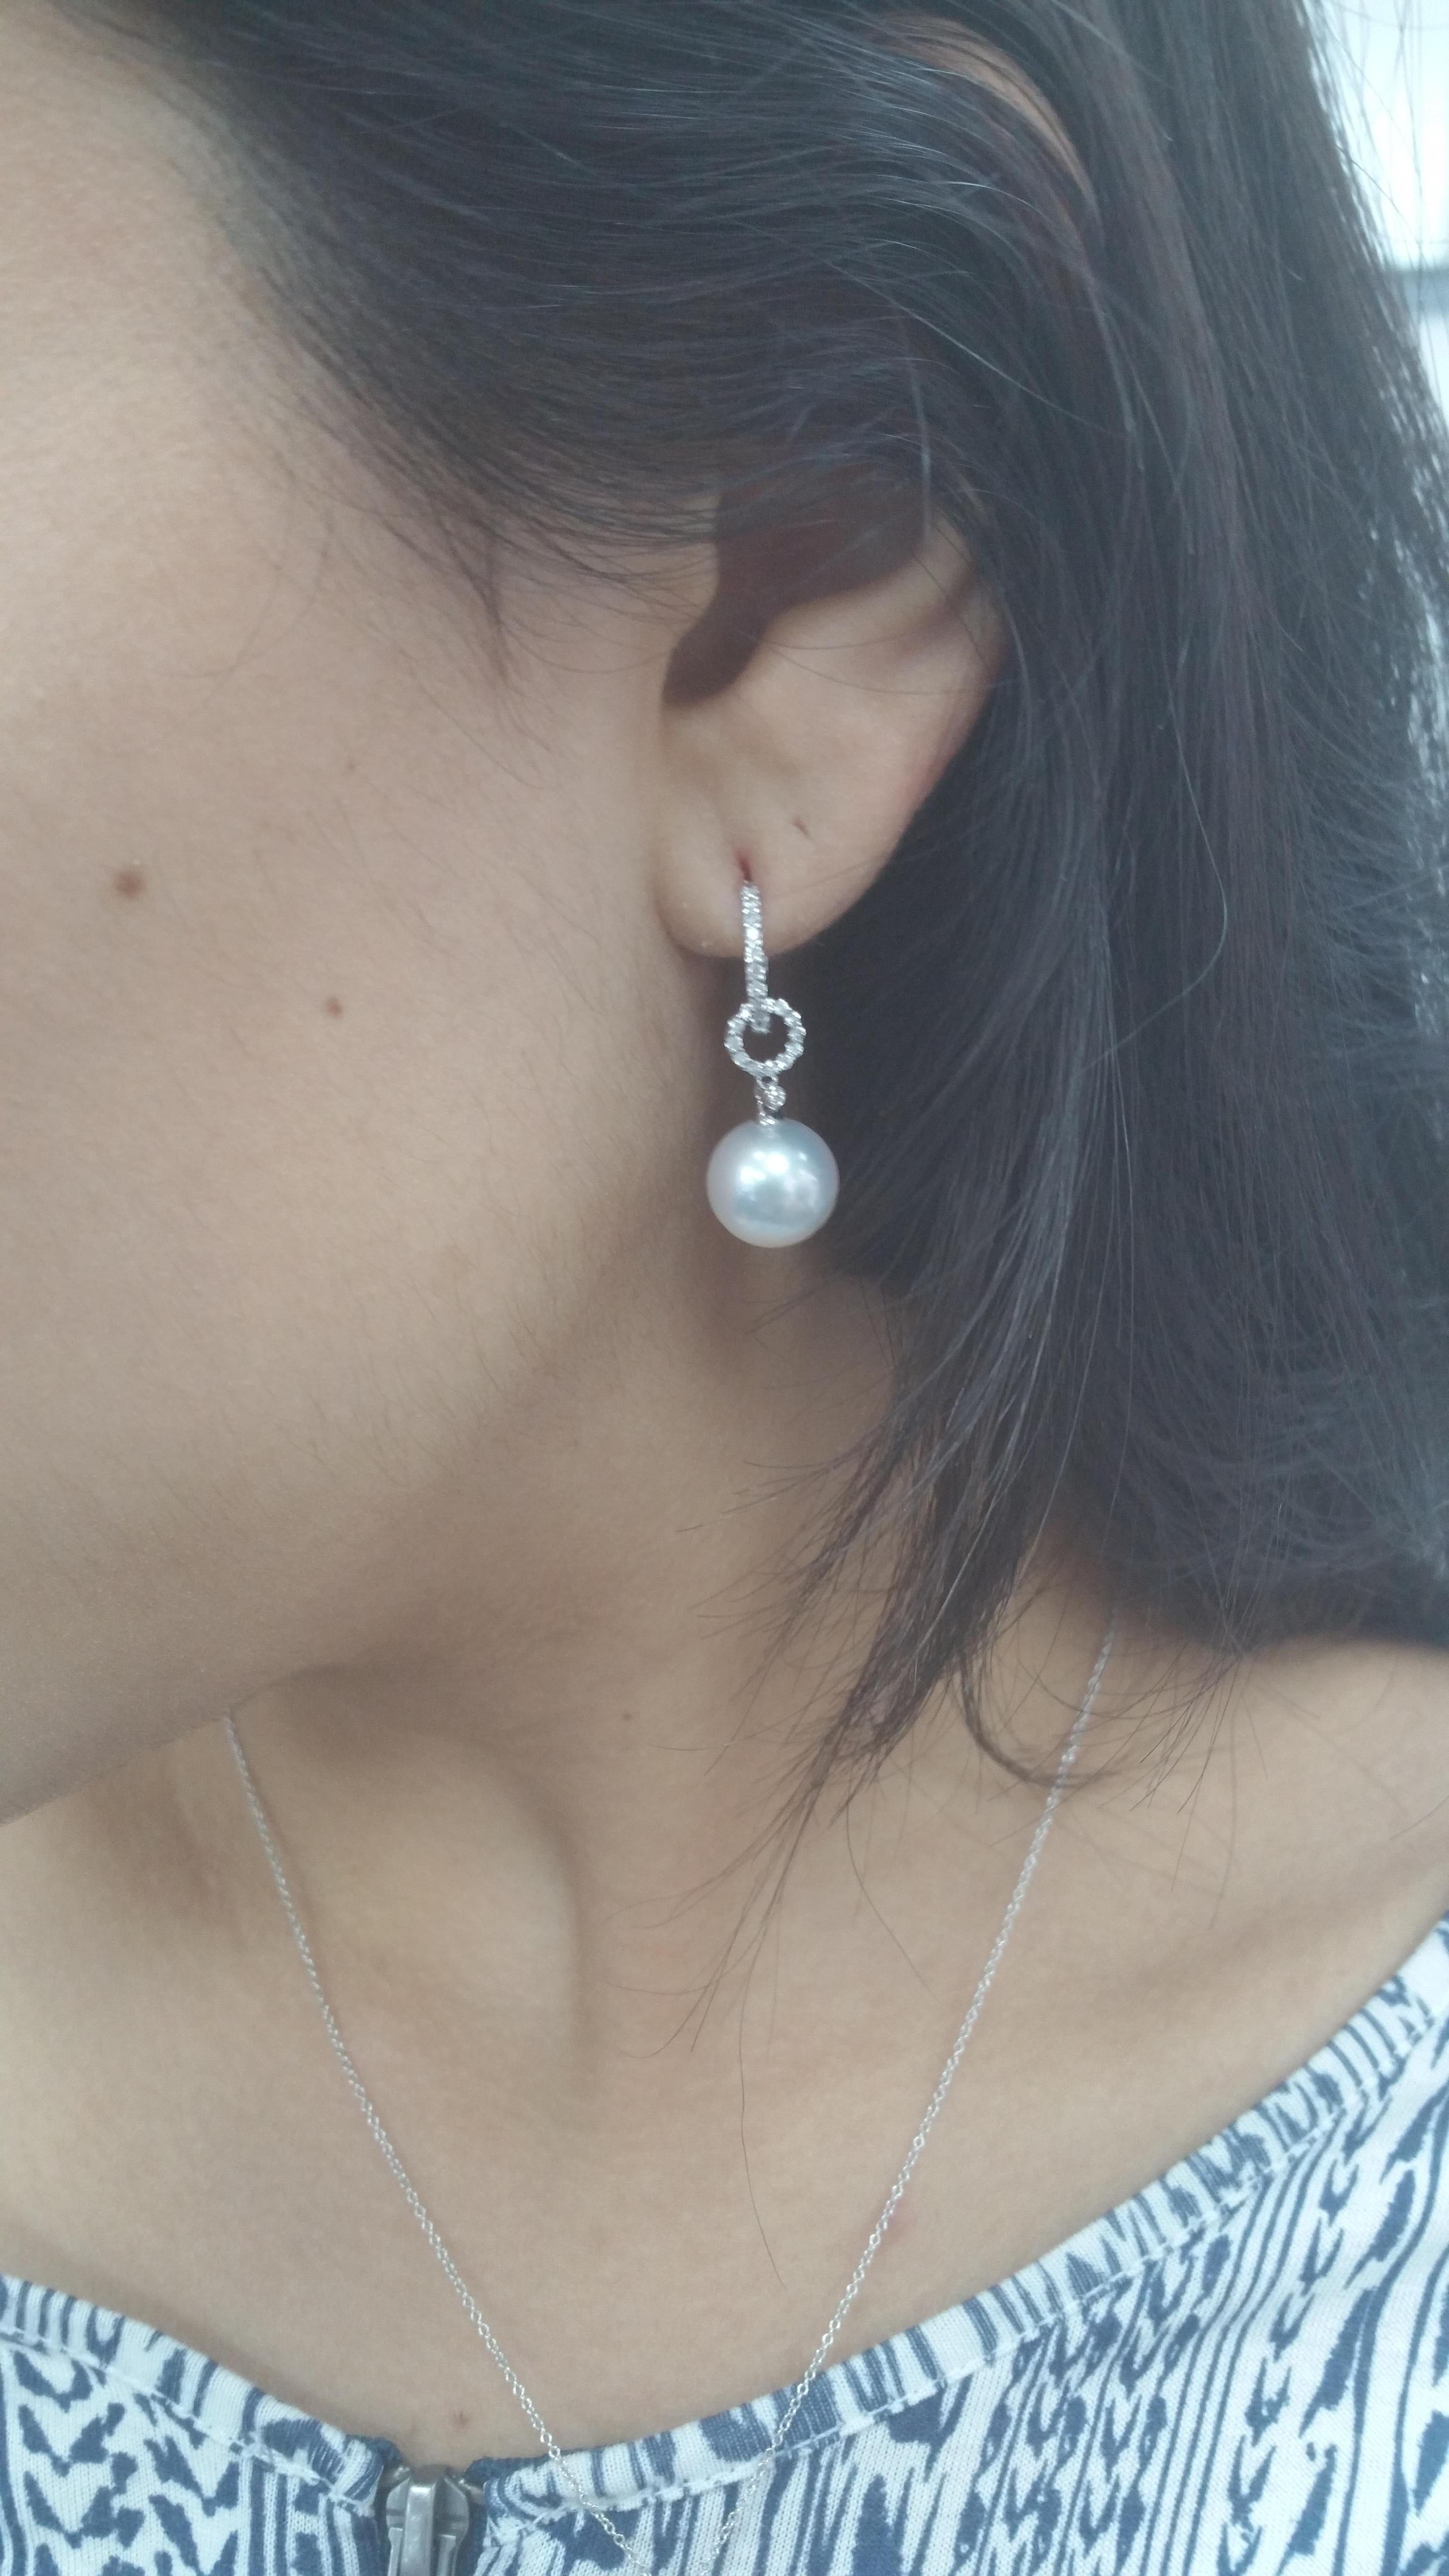 18K White gold drop earrings featuring two South Sea Pearls measuring 10-11 mm flanked with round brilliants weighing 0.29 carats. 

Luster: AAA Excellent
Pearl Quality: AAA